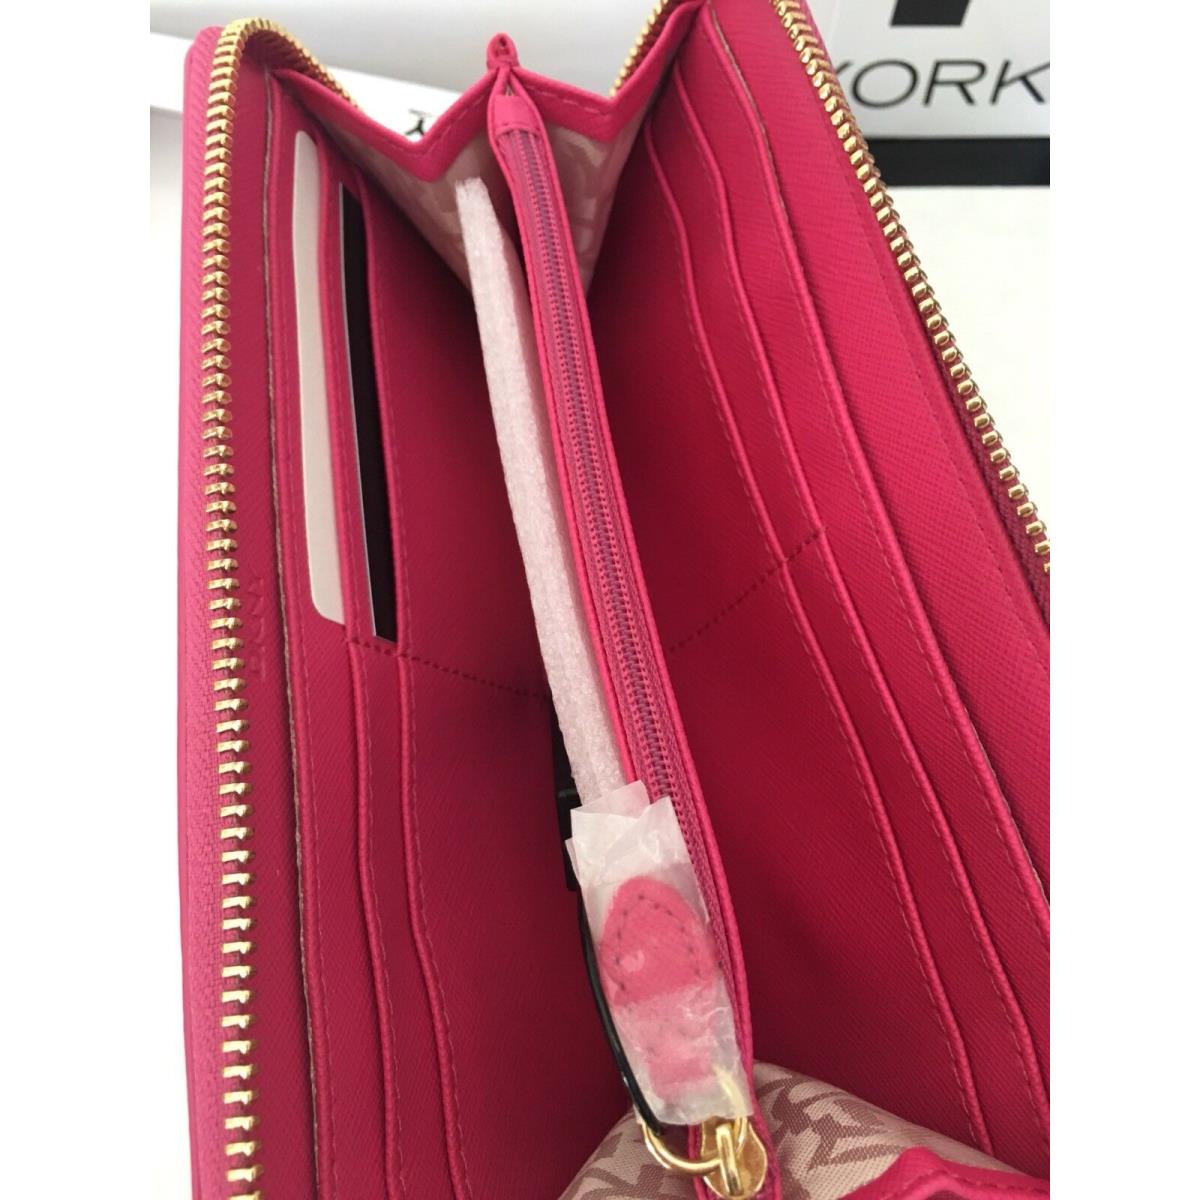 Leather wallet Dkny Pink in Leather - 23971982